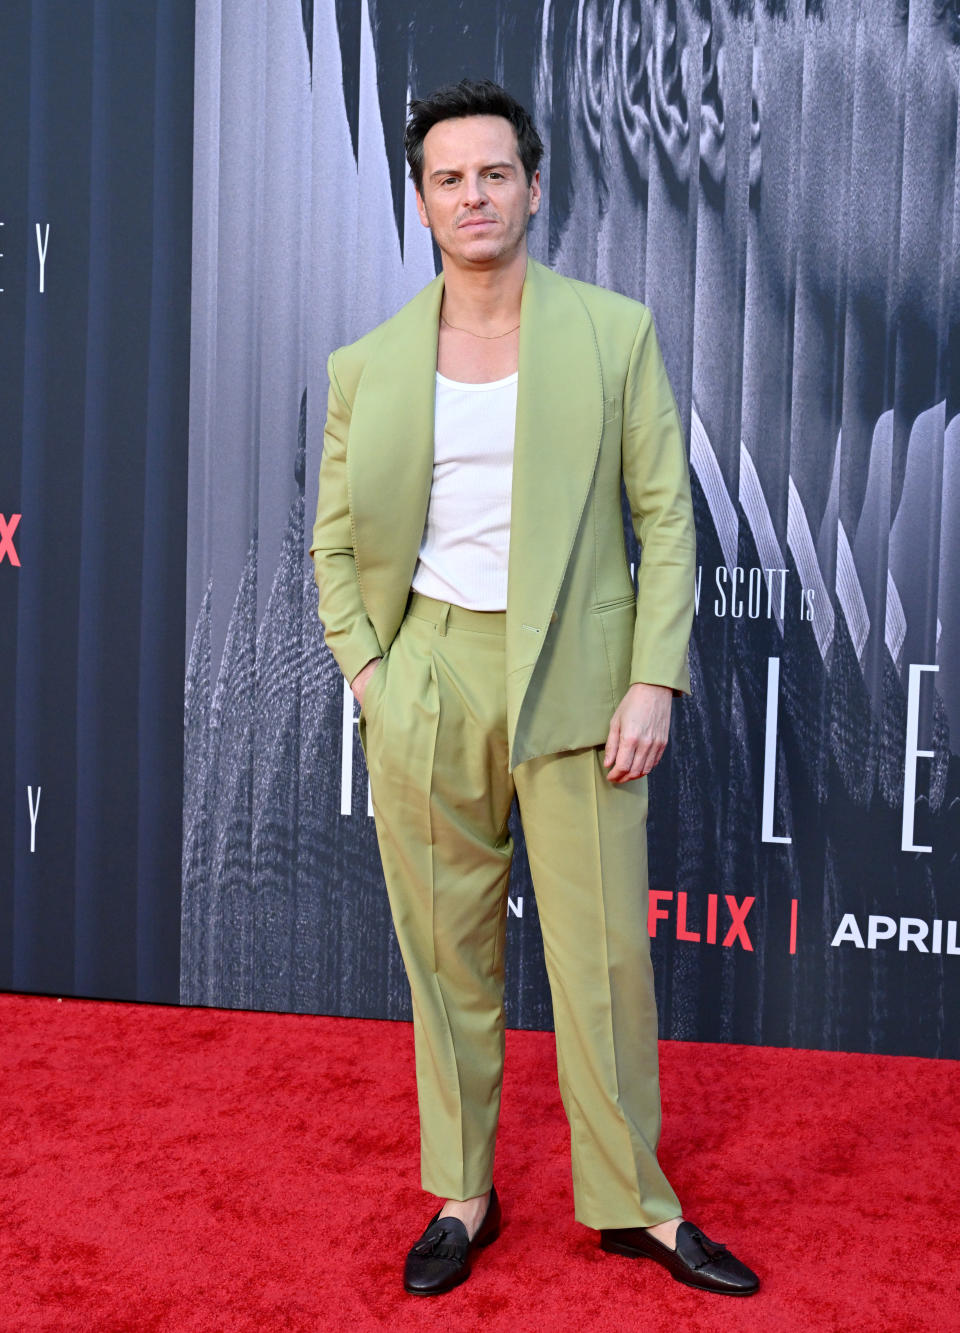 LOS ANGELES, CALIFORNIA - APRIL 03: Andrew Scott attends the Los Angeles Premiere of Netflix's "Ripley" at The Egyptian Theatre Hollywood on April 03, 2024 in Los Angeles, California. (Photo by Axelle/Bauer-Griffin/FilmMagic)